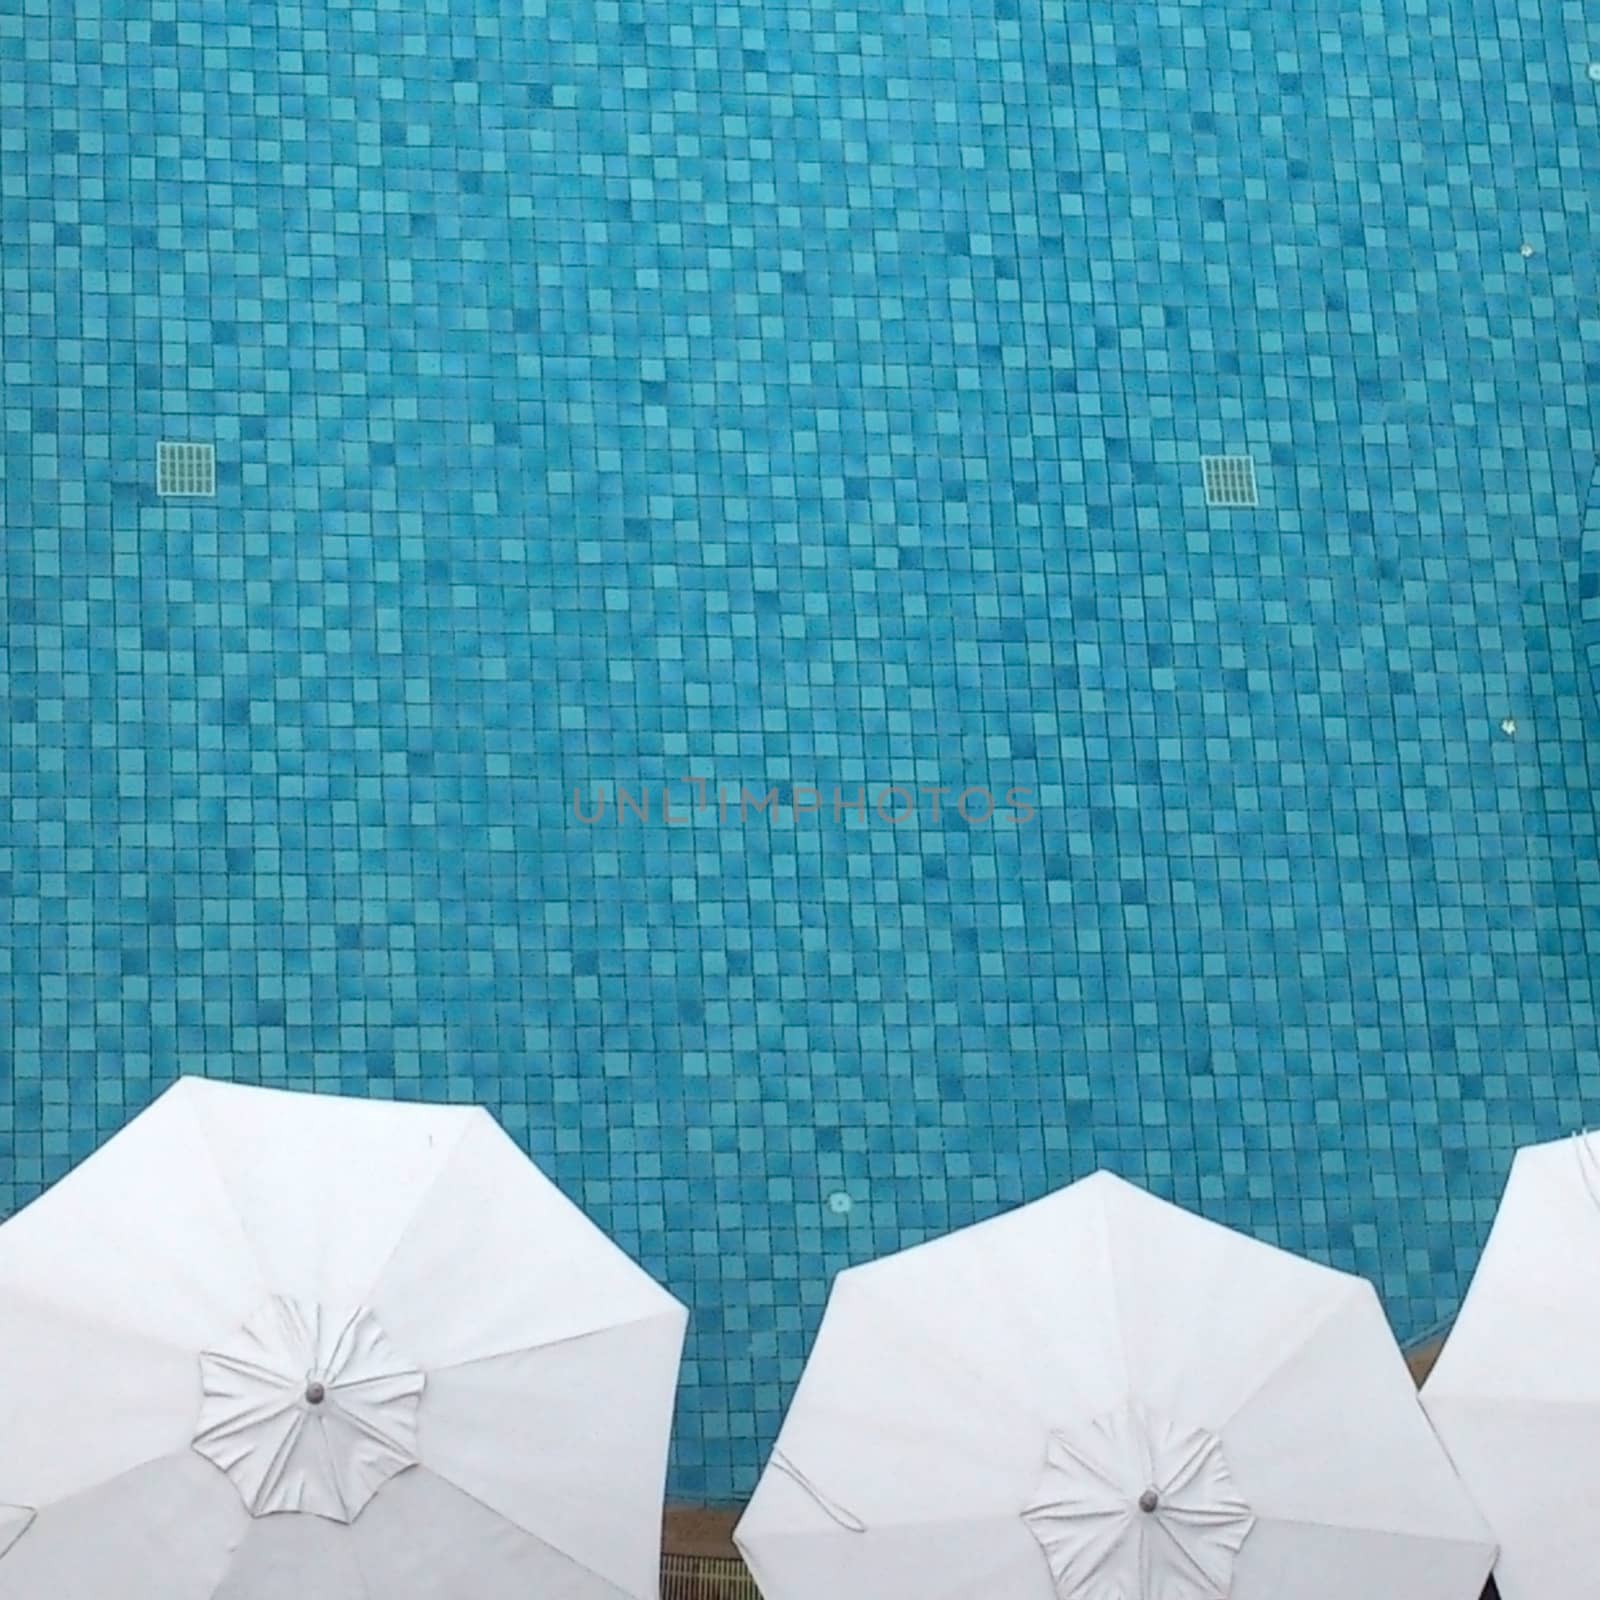 Top view of swimming pool side with umbrella